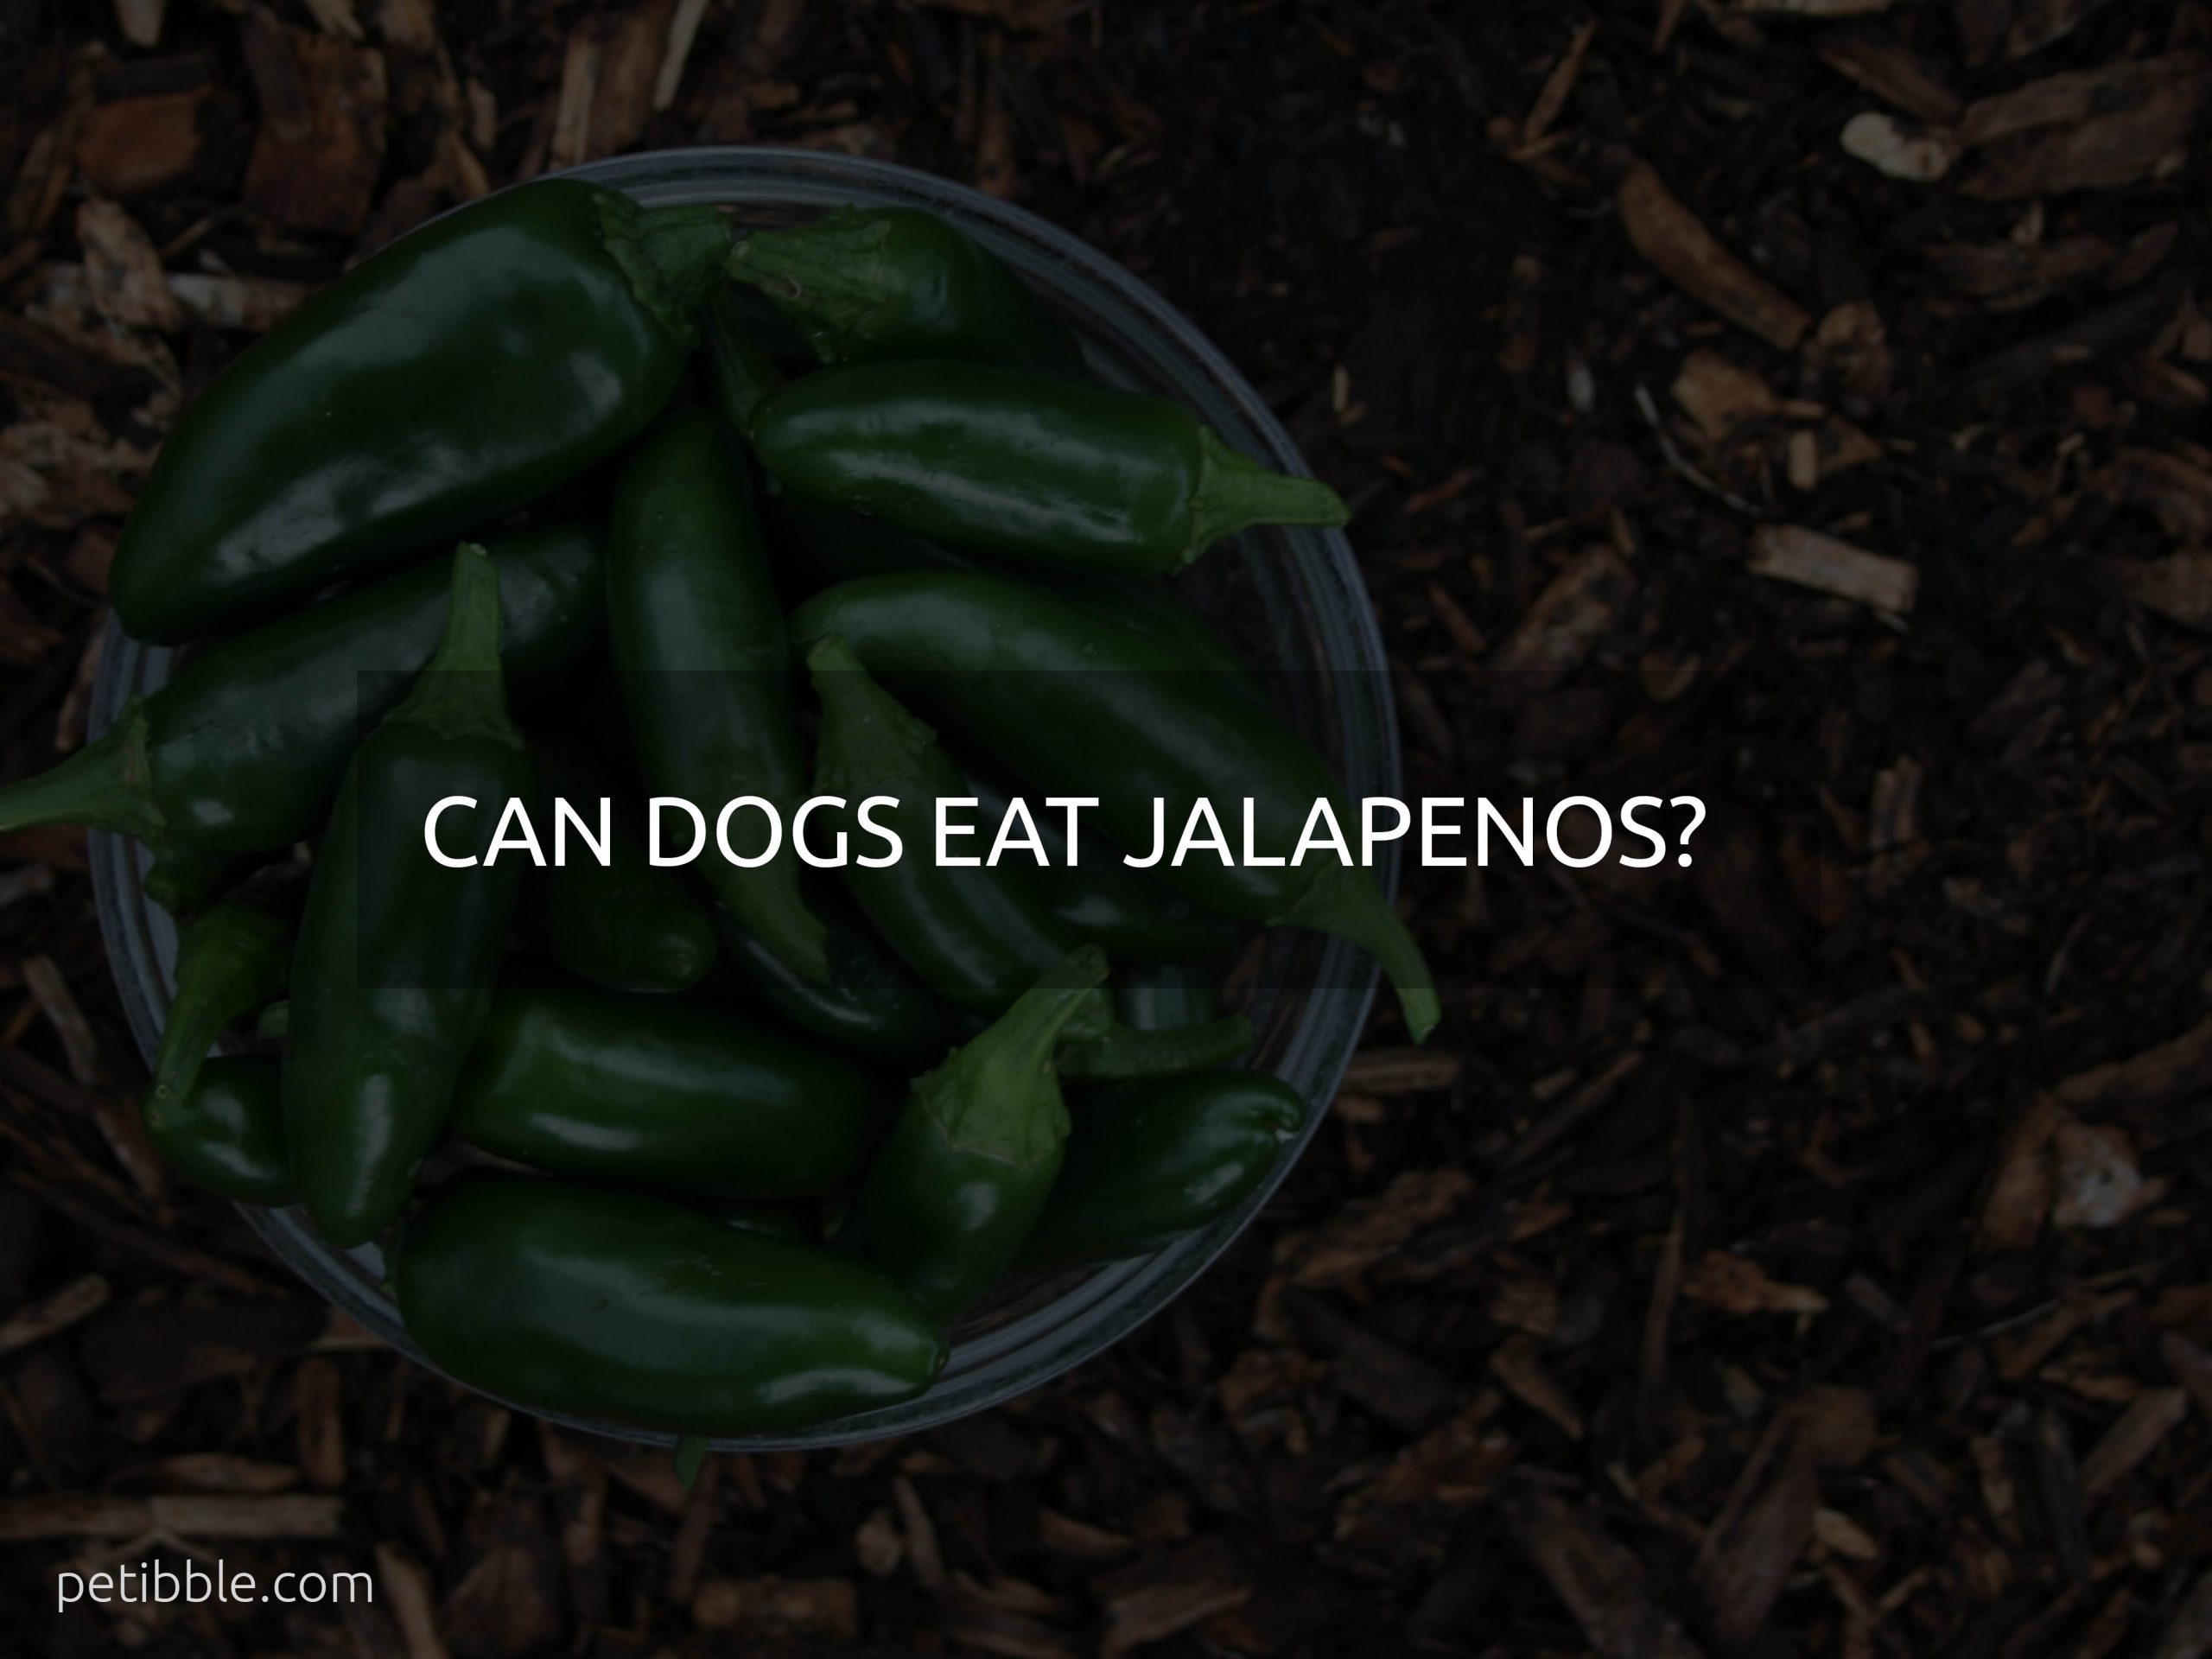 can dogs eat jalapenos?